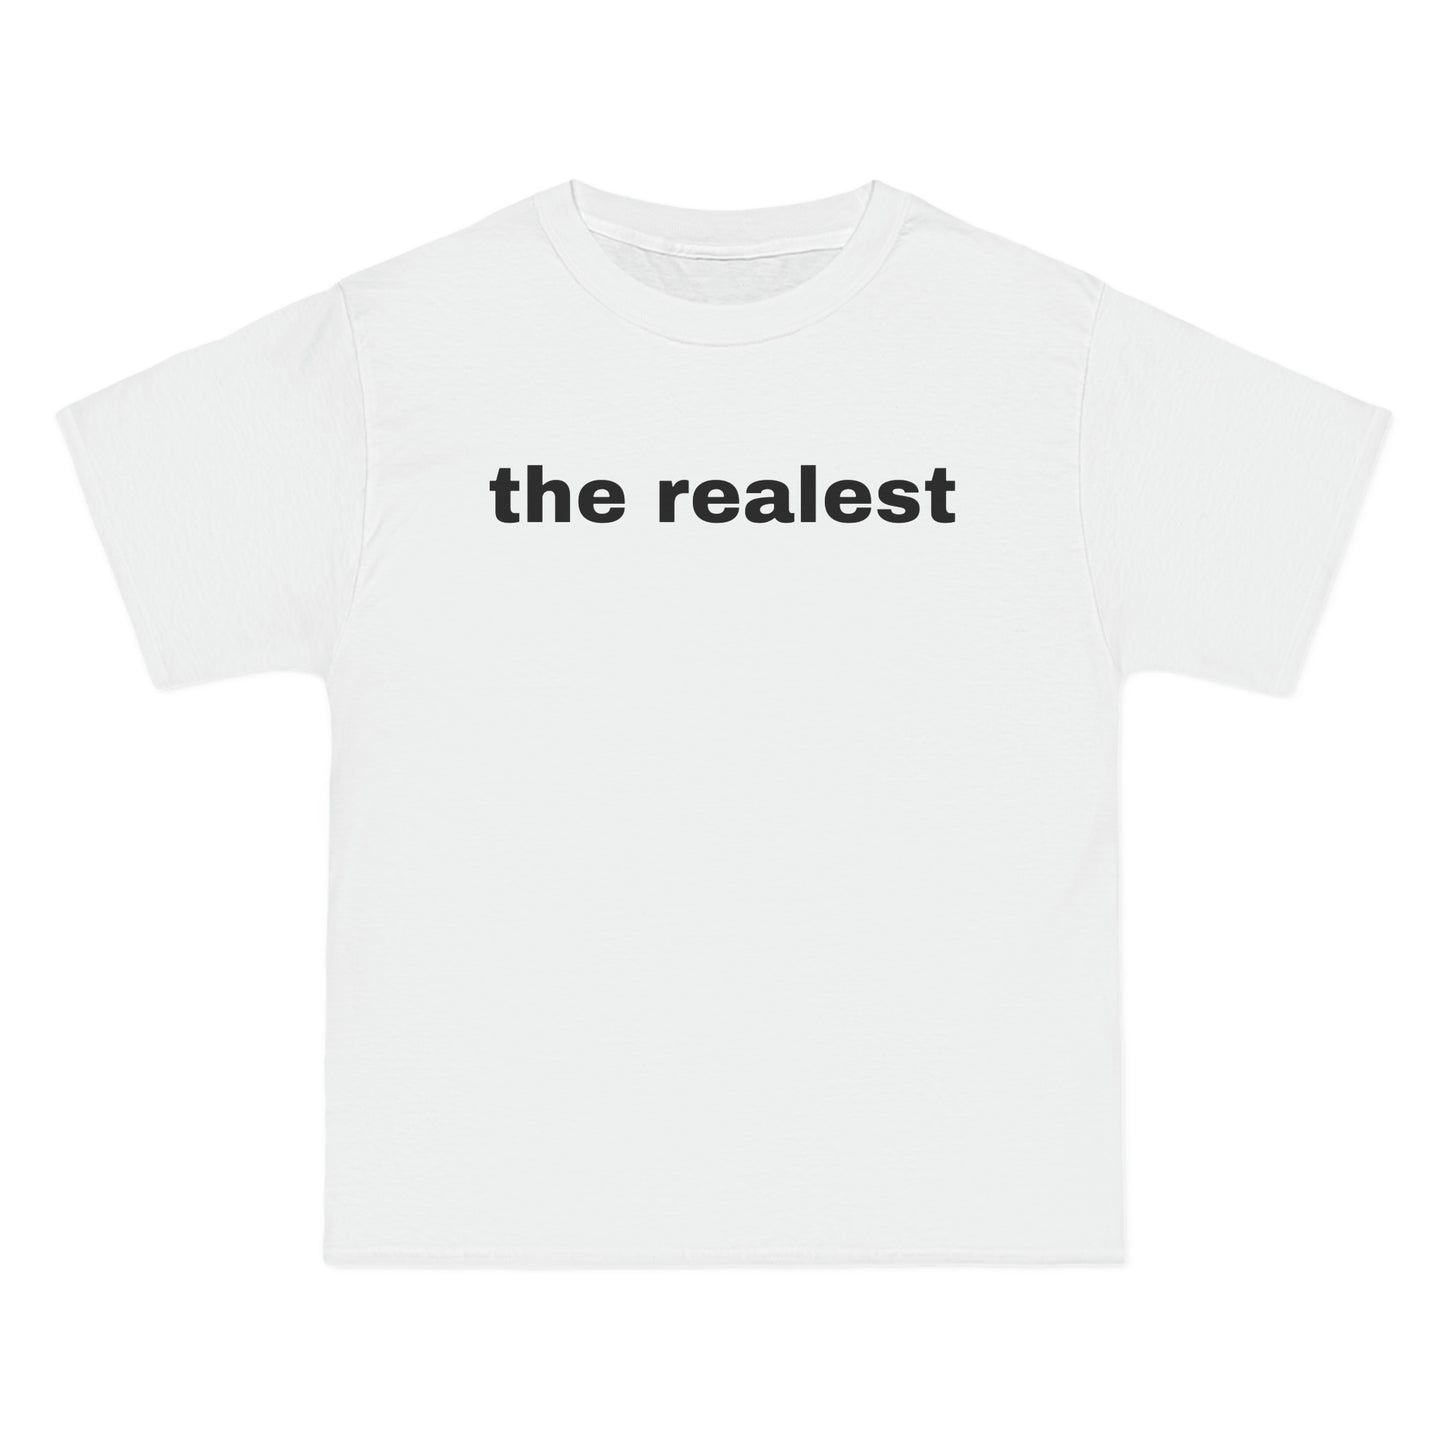 the realest Tee